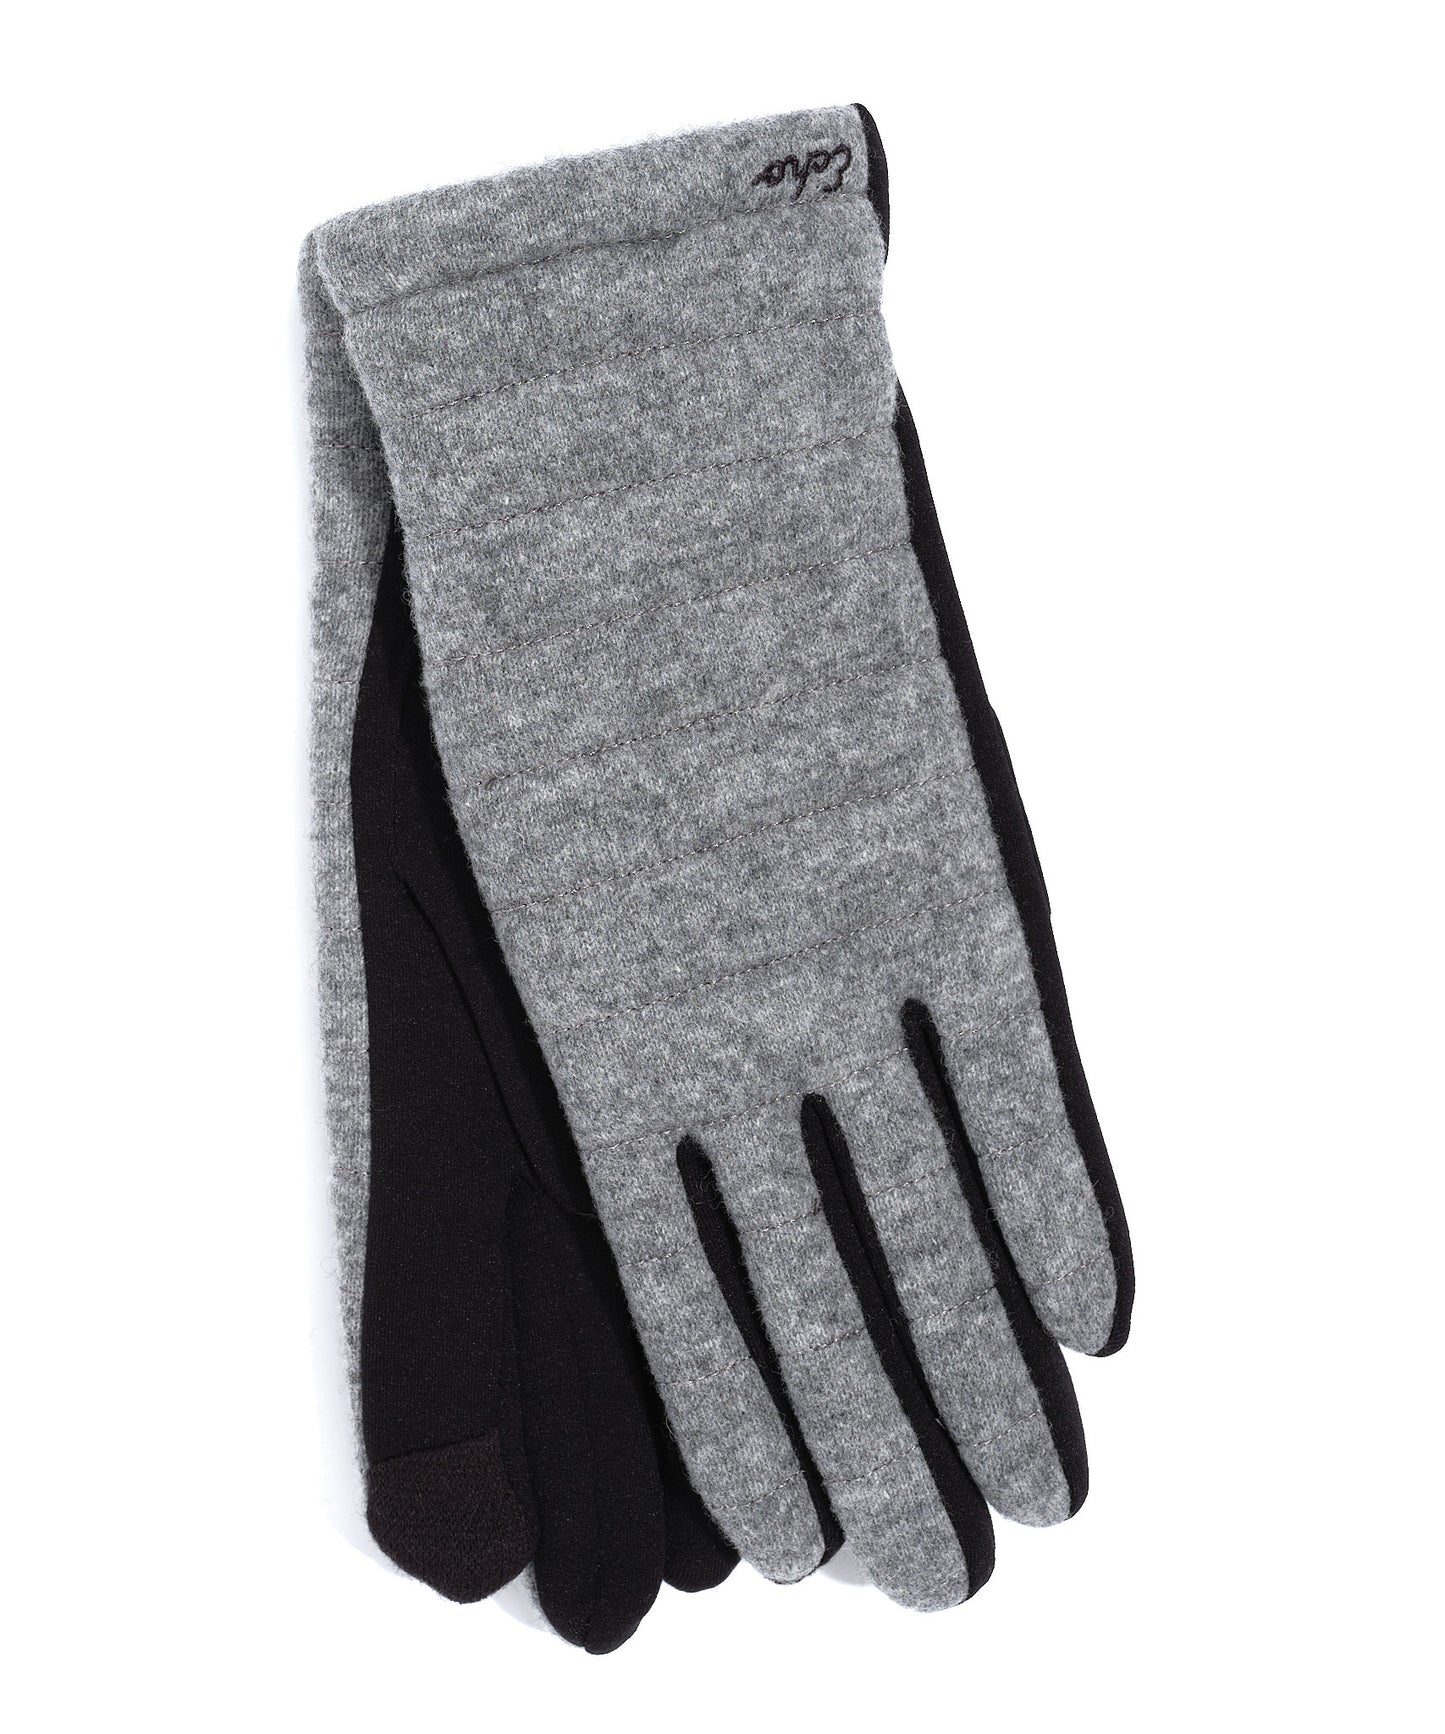 Quilted Commuter Glove in color Grey Heather